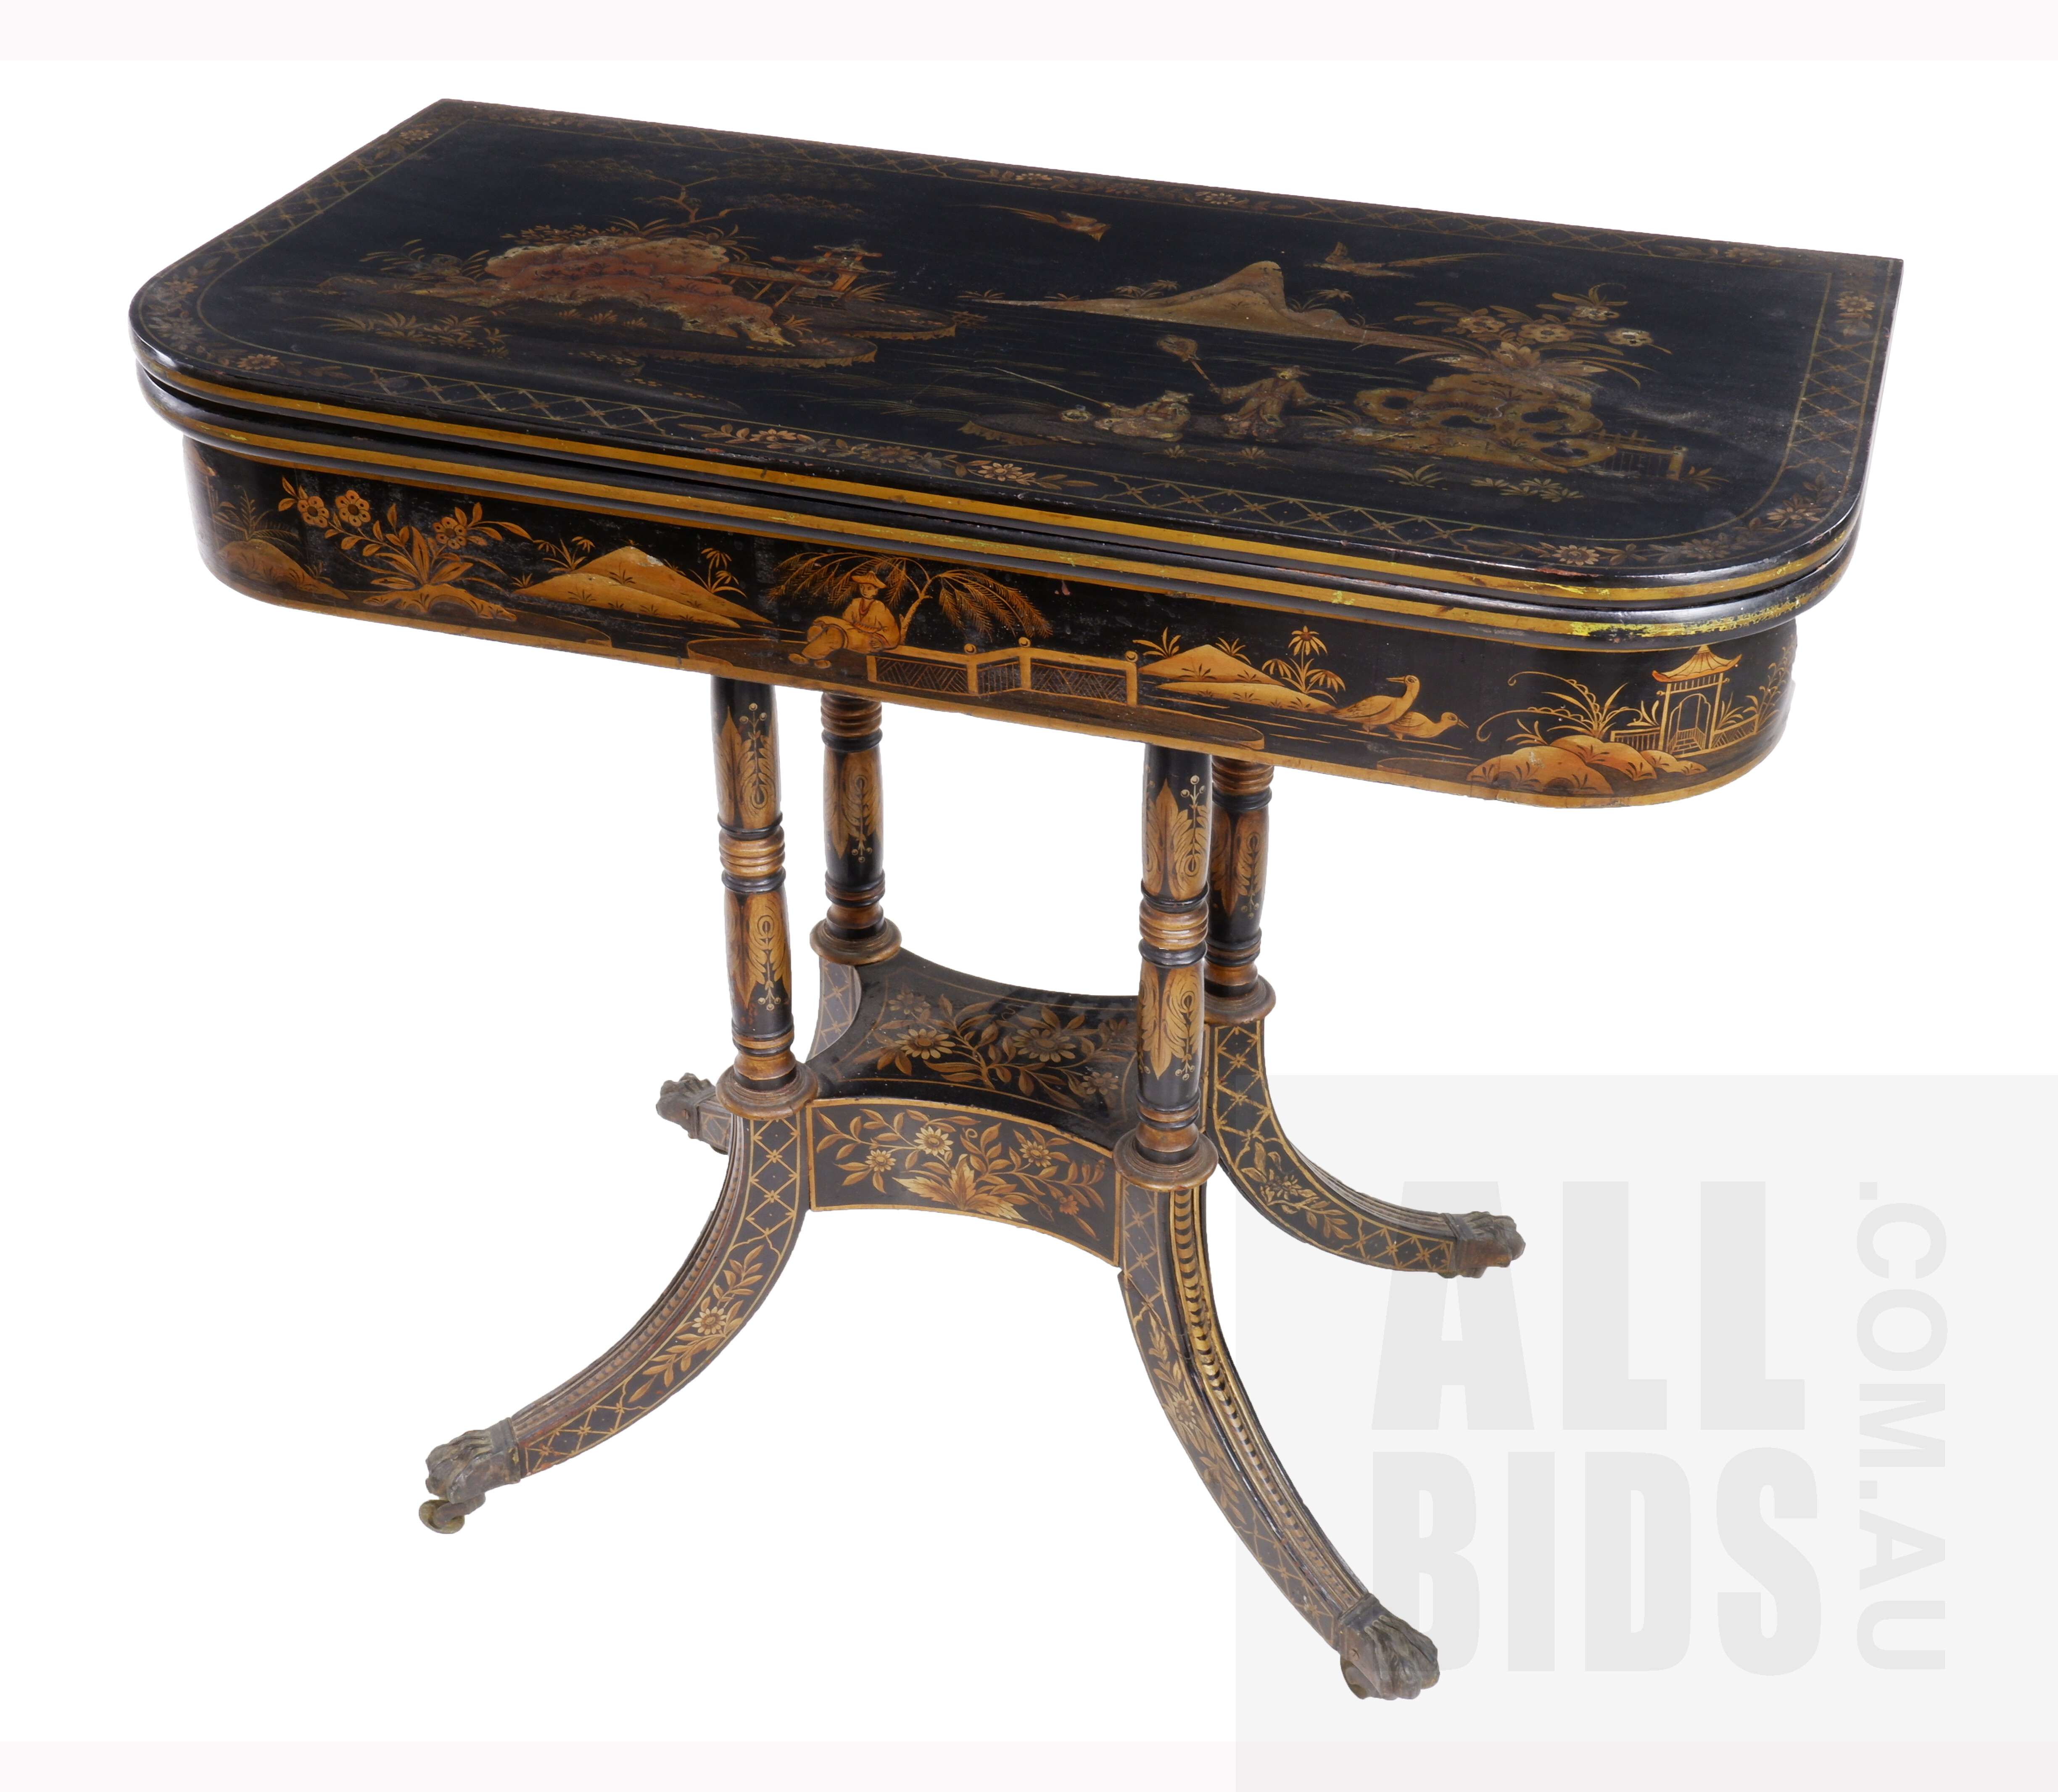 'Late Georgian Chinoiserie Black and Gilt Lacquered Fold-over Games Table the Sabre Legs Terminating with Brass Paw Sabots and Castors, 19th Century'